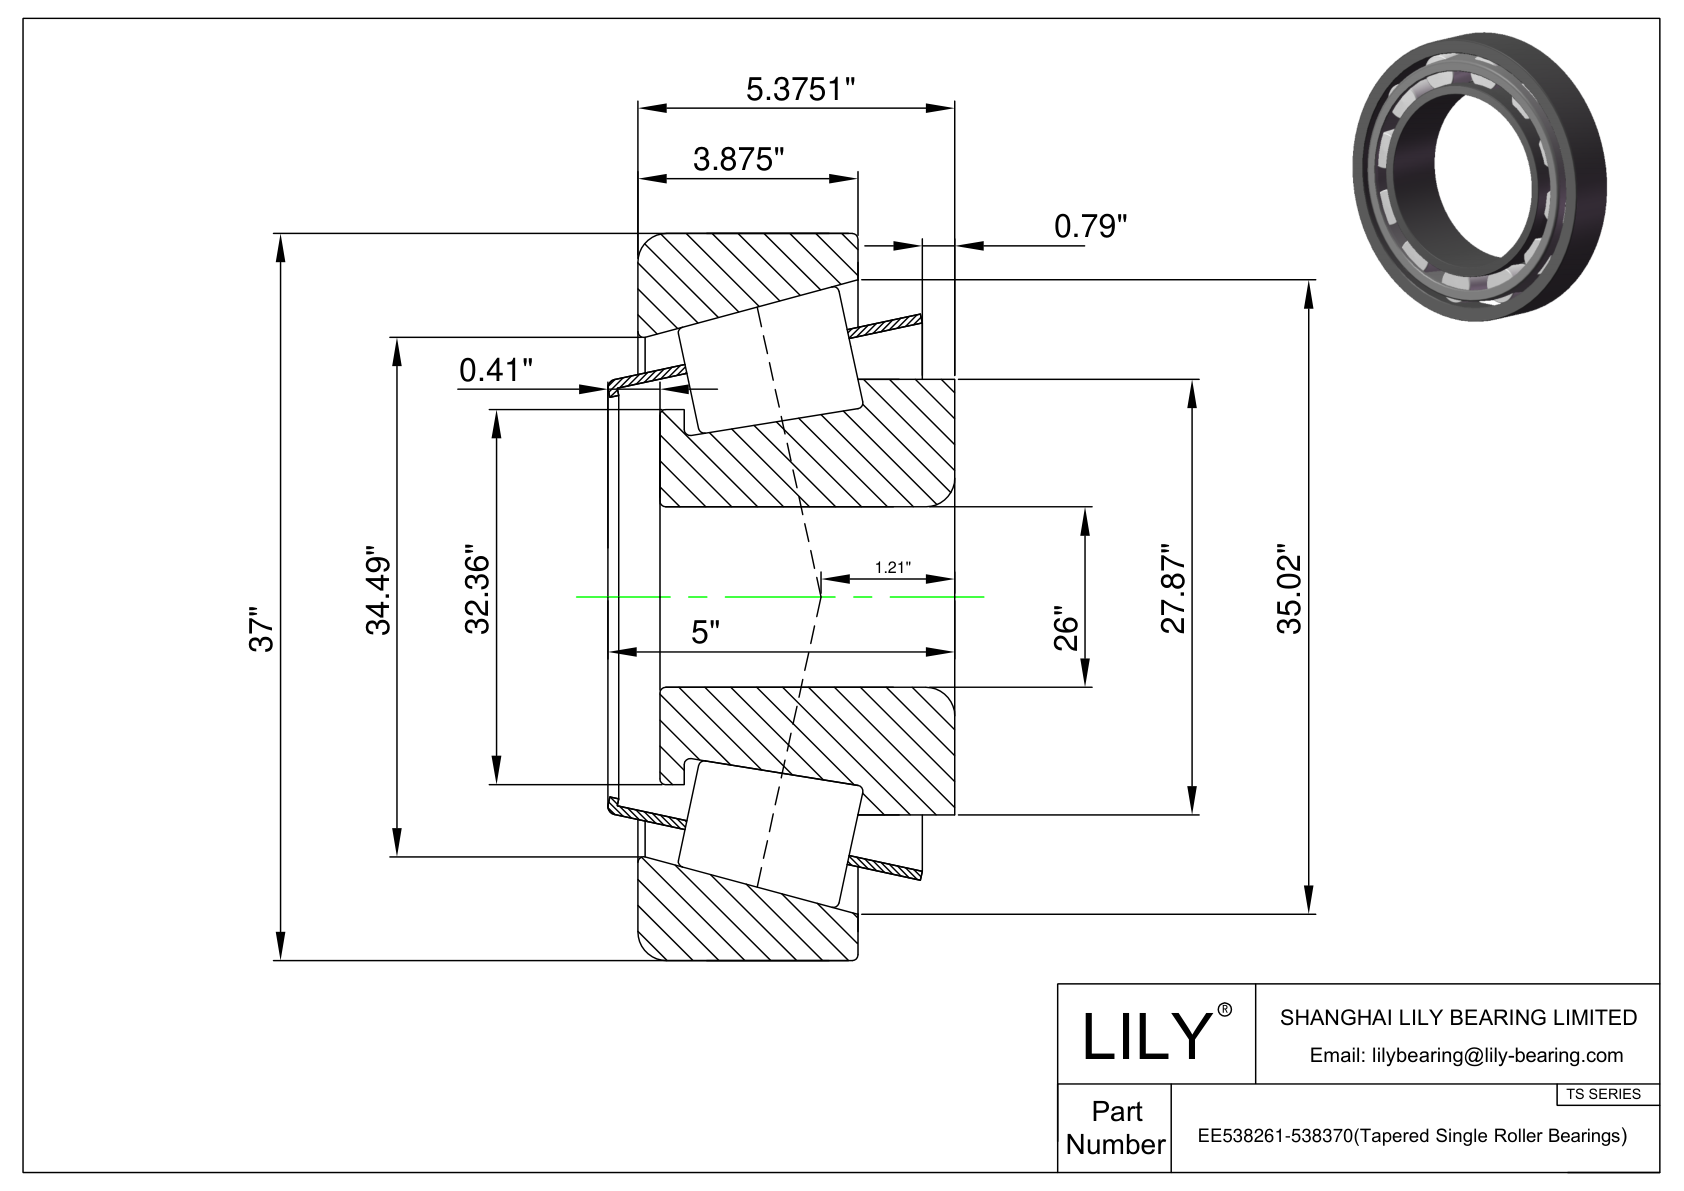 EE538261-538370 TS (Tapered Single Roller Bearings) (Imperial) cad drawing